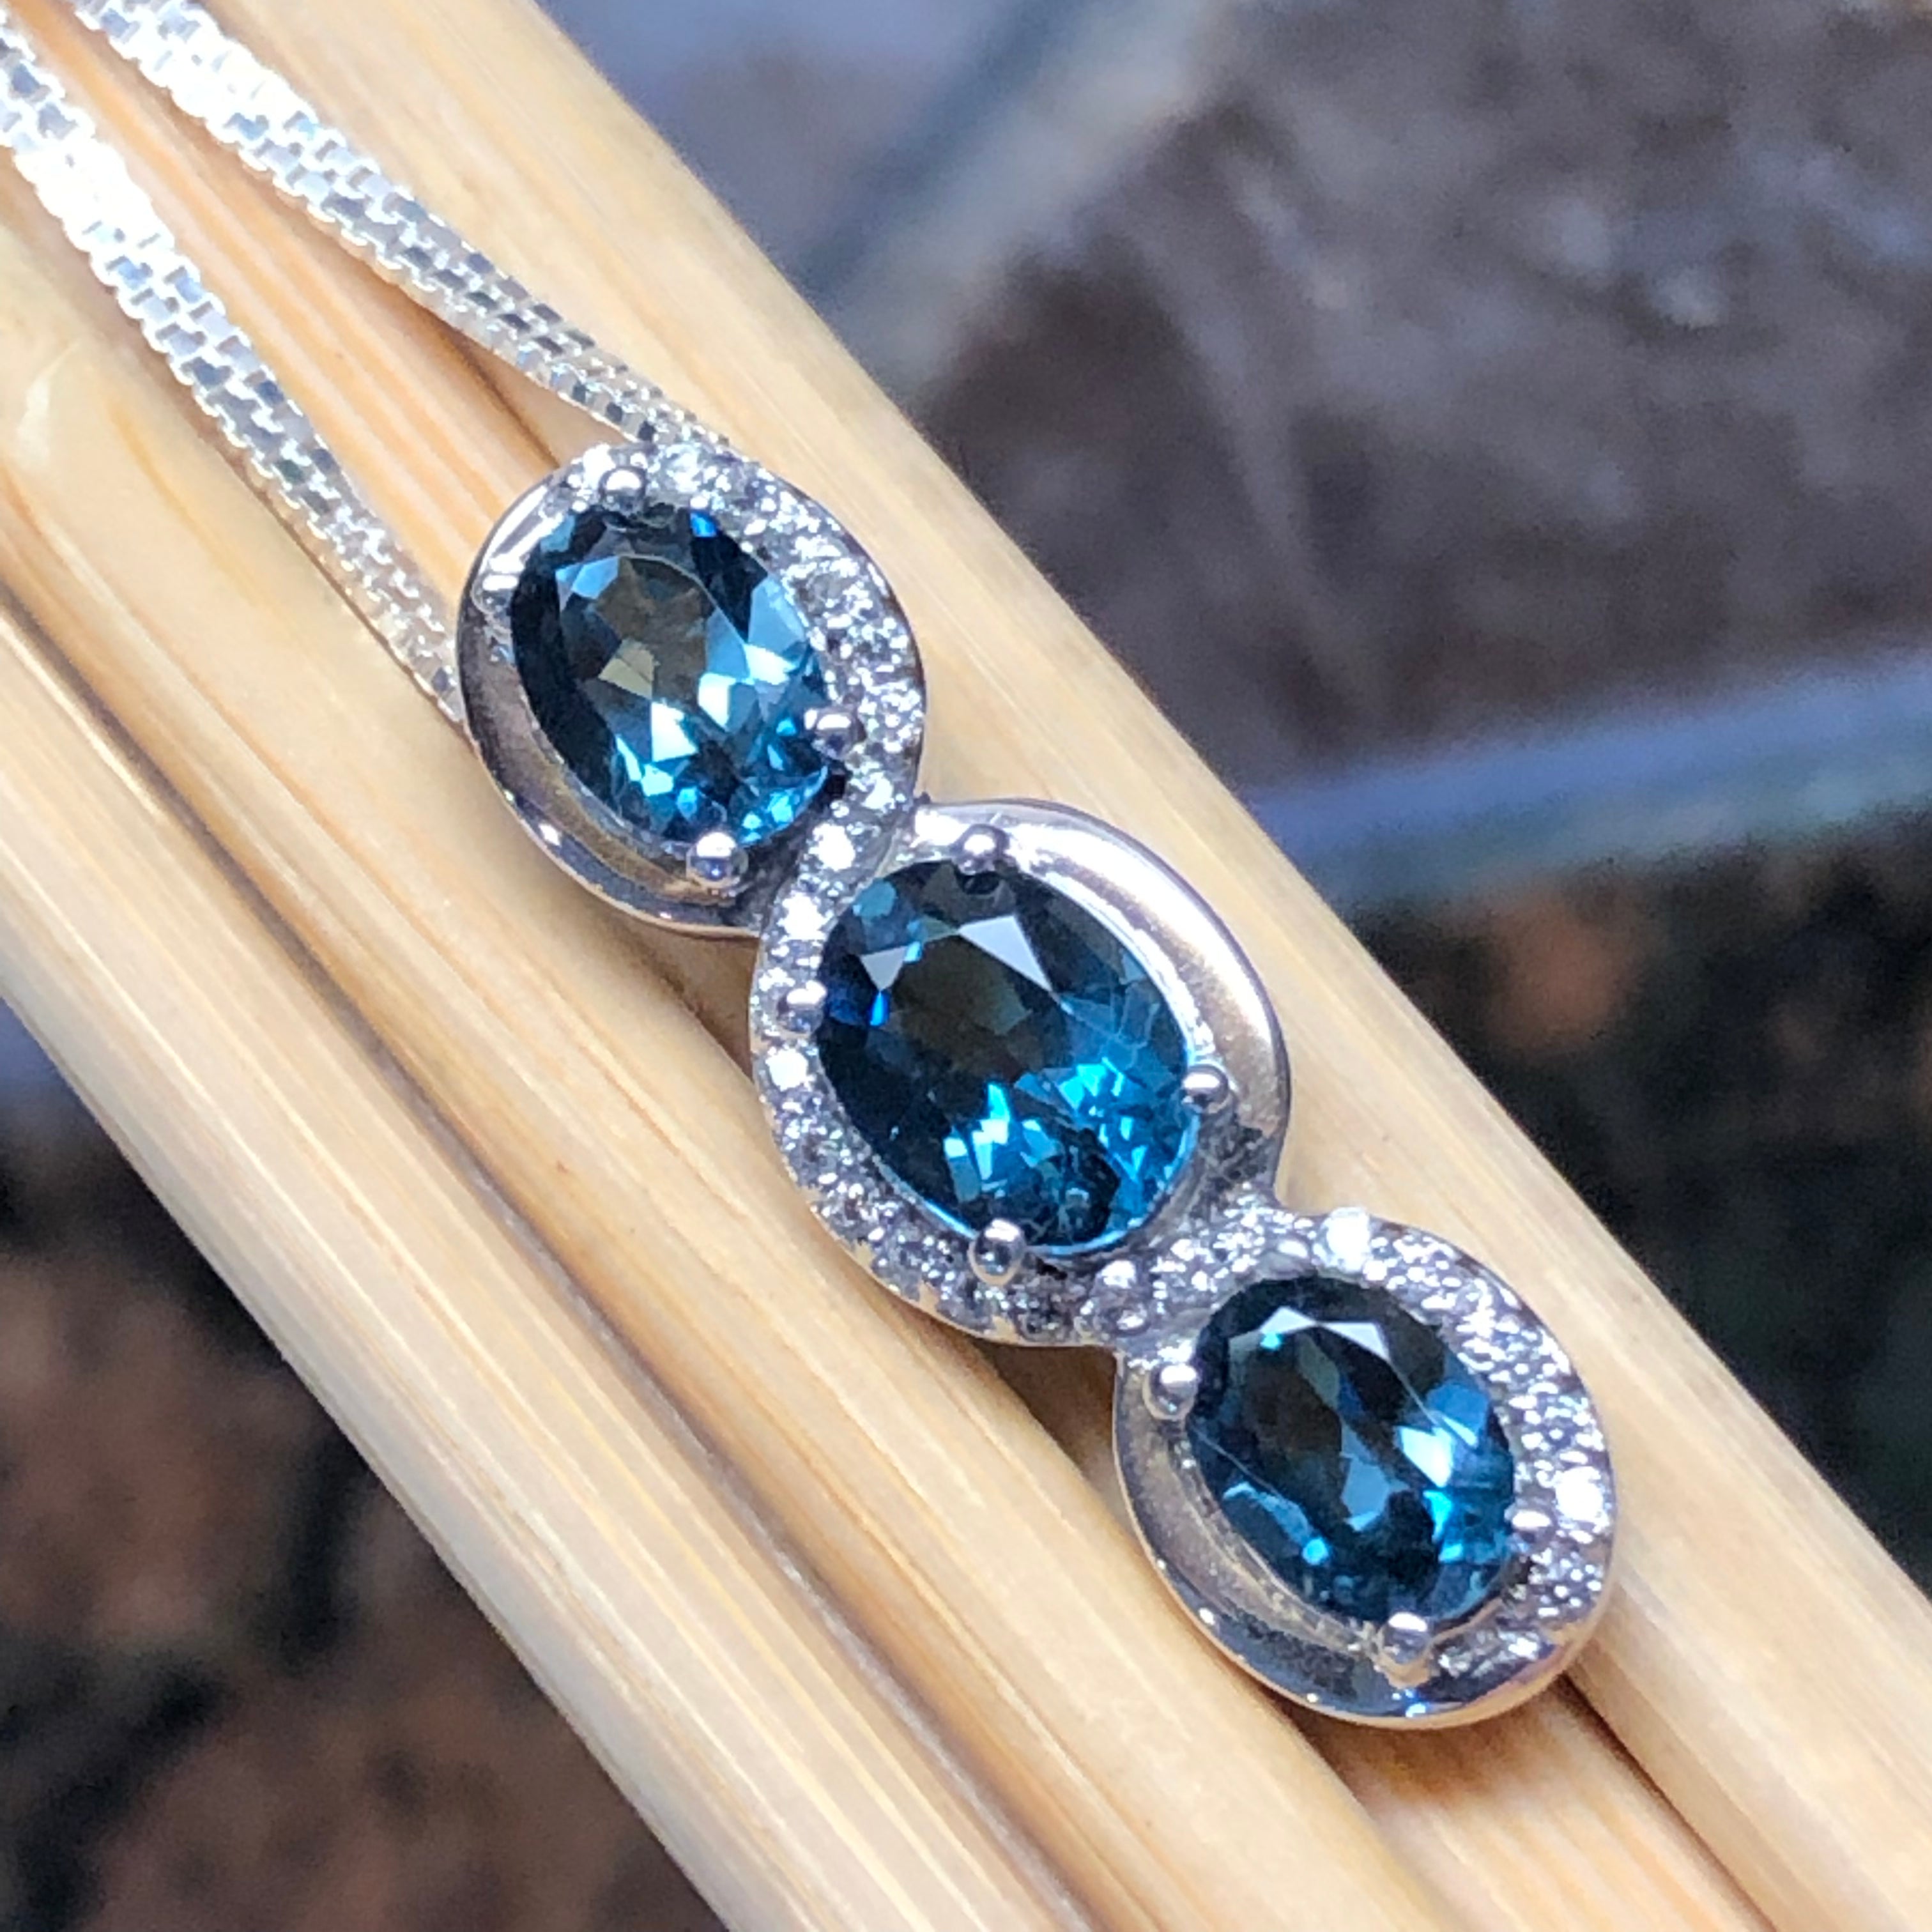 Natural 5ct London Blue Topaz, White Sapphire 925 Solid Sterling Silver Pendant Necklace 16" - Natural Rocks by Kala